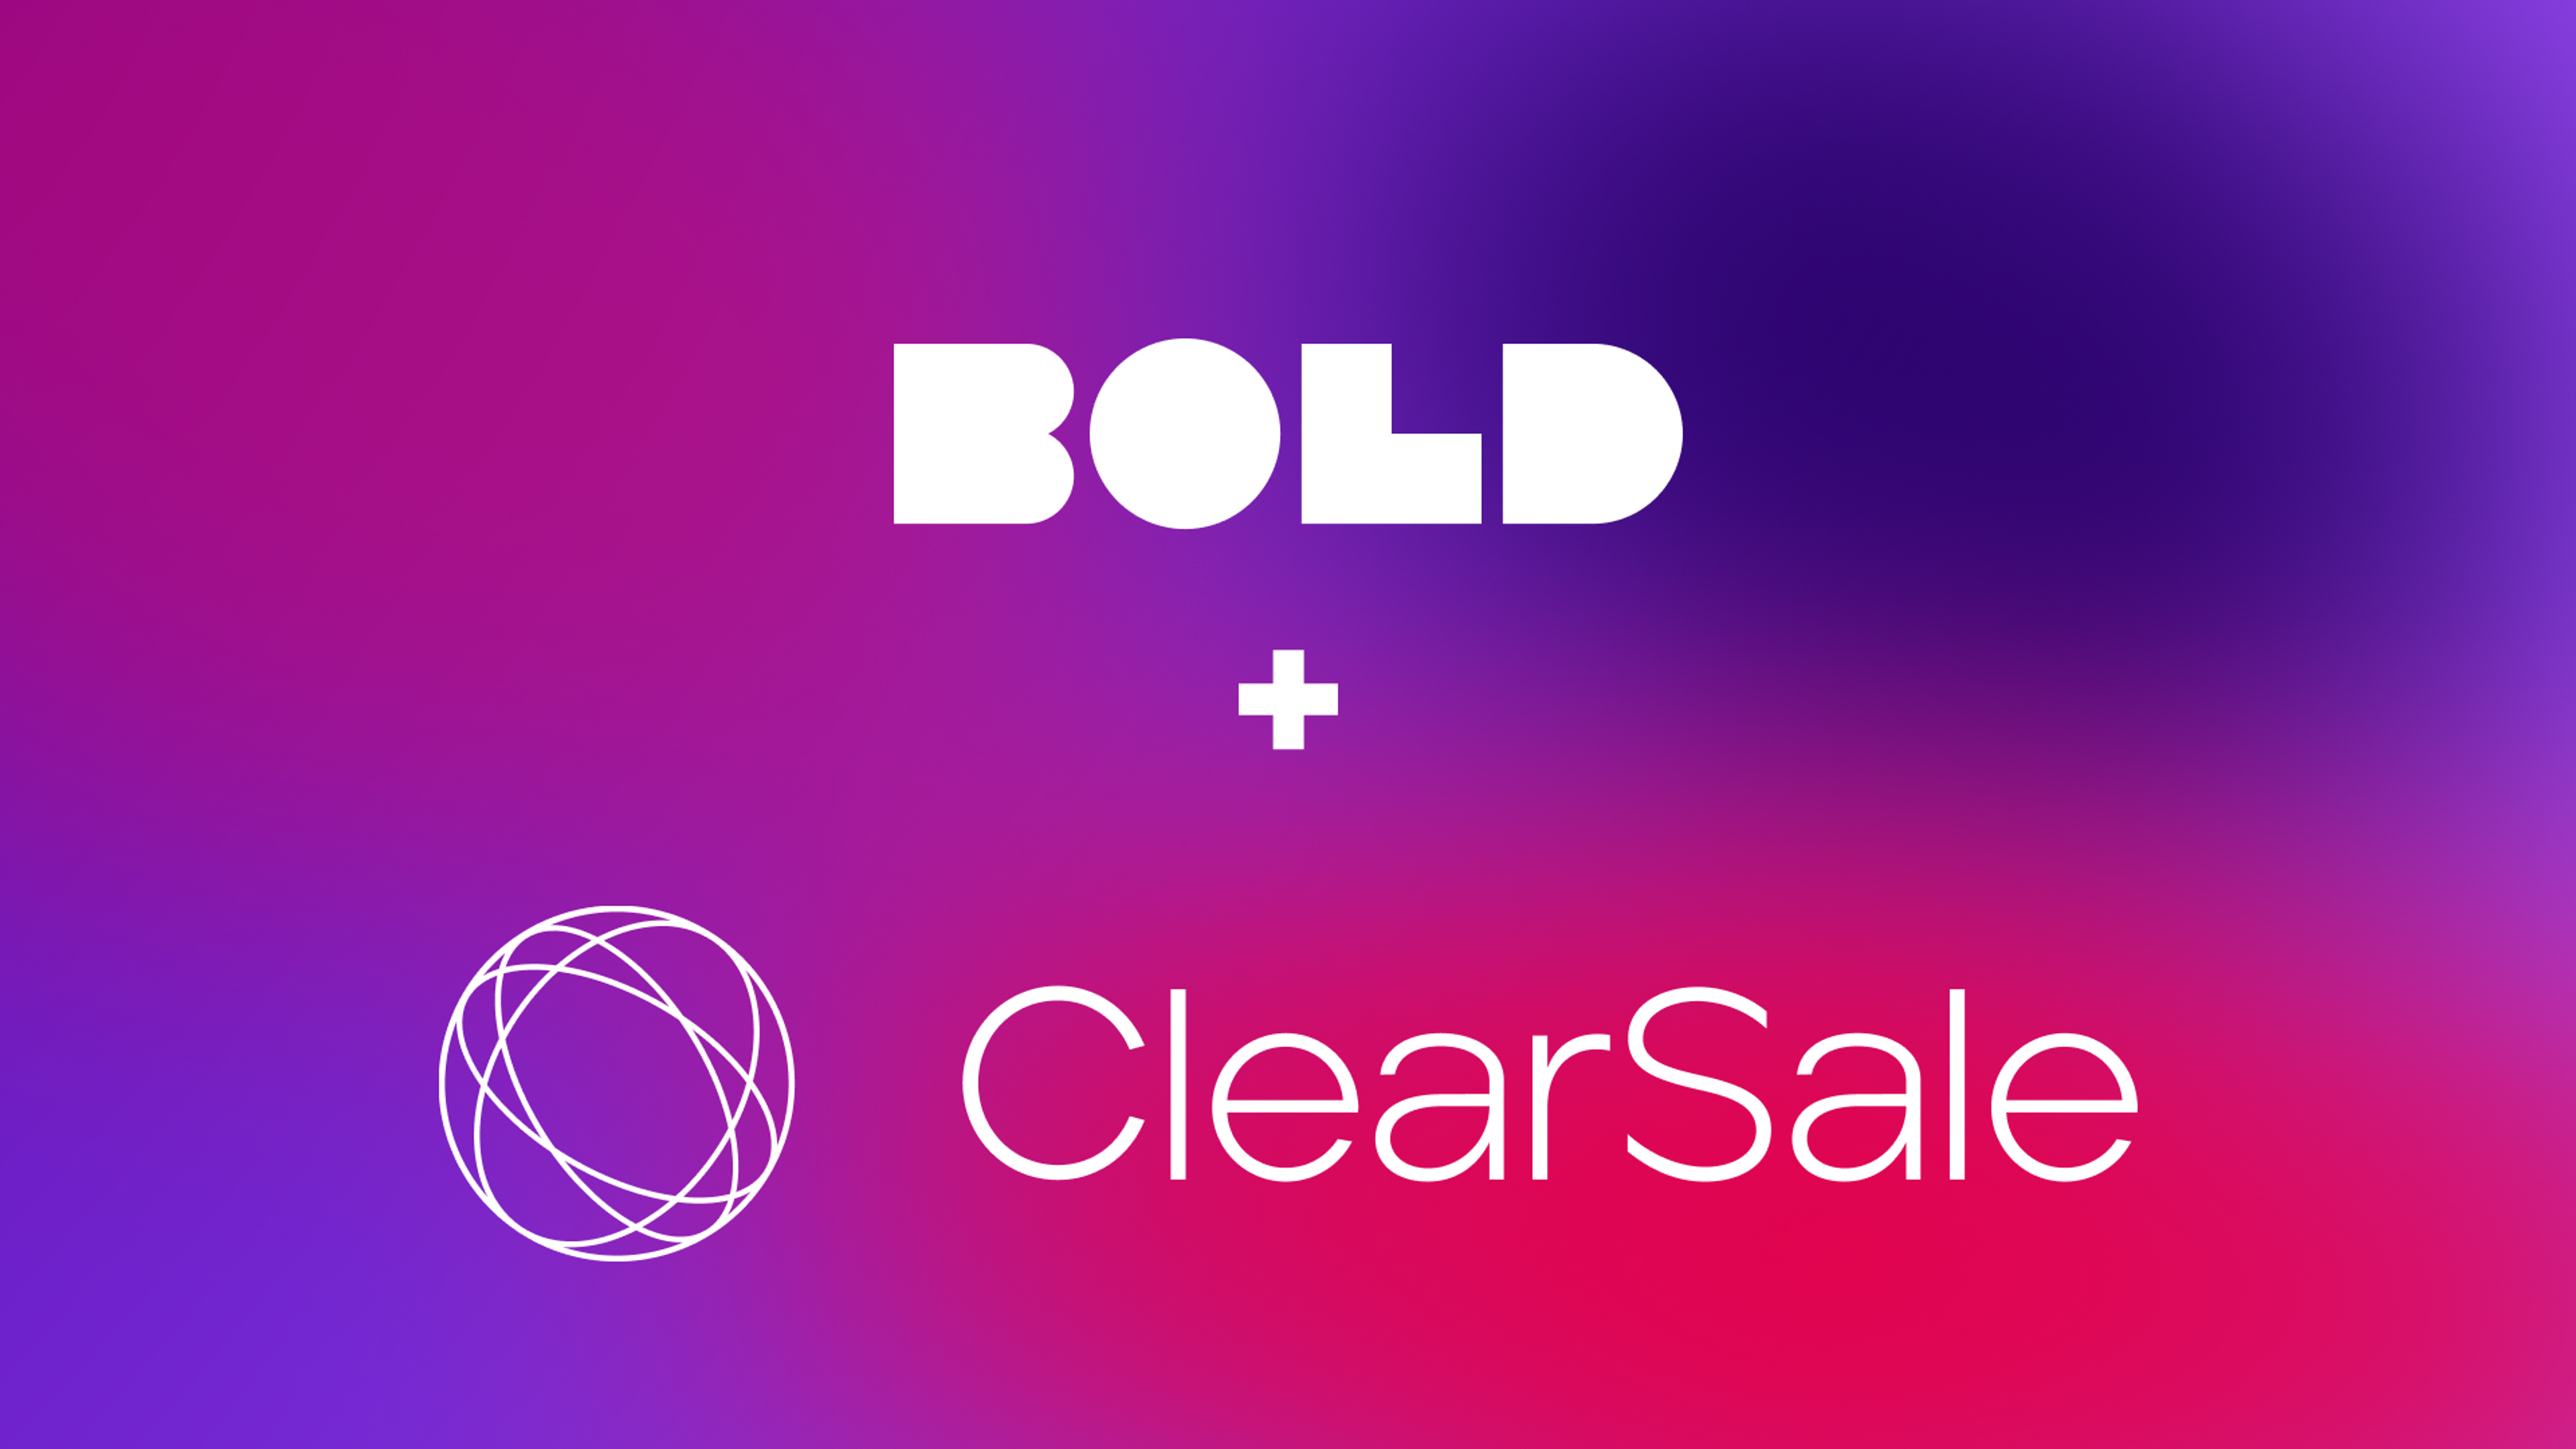 The words Bold + Clearsale next to ClearSale logo